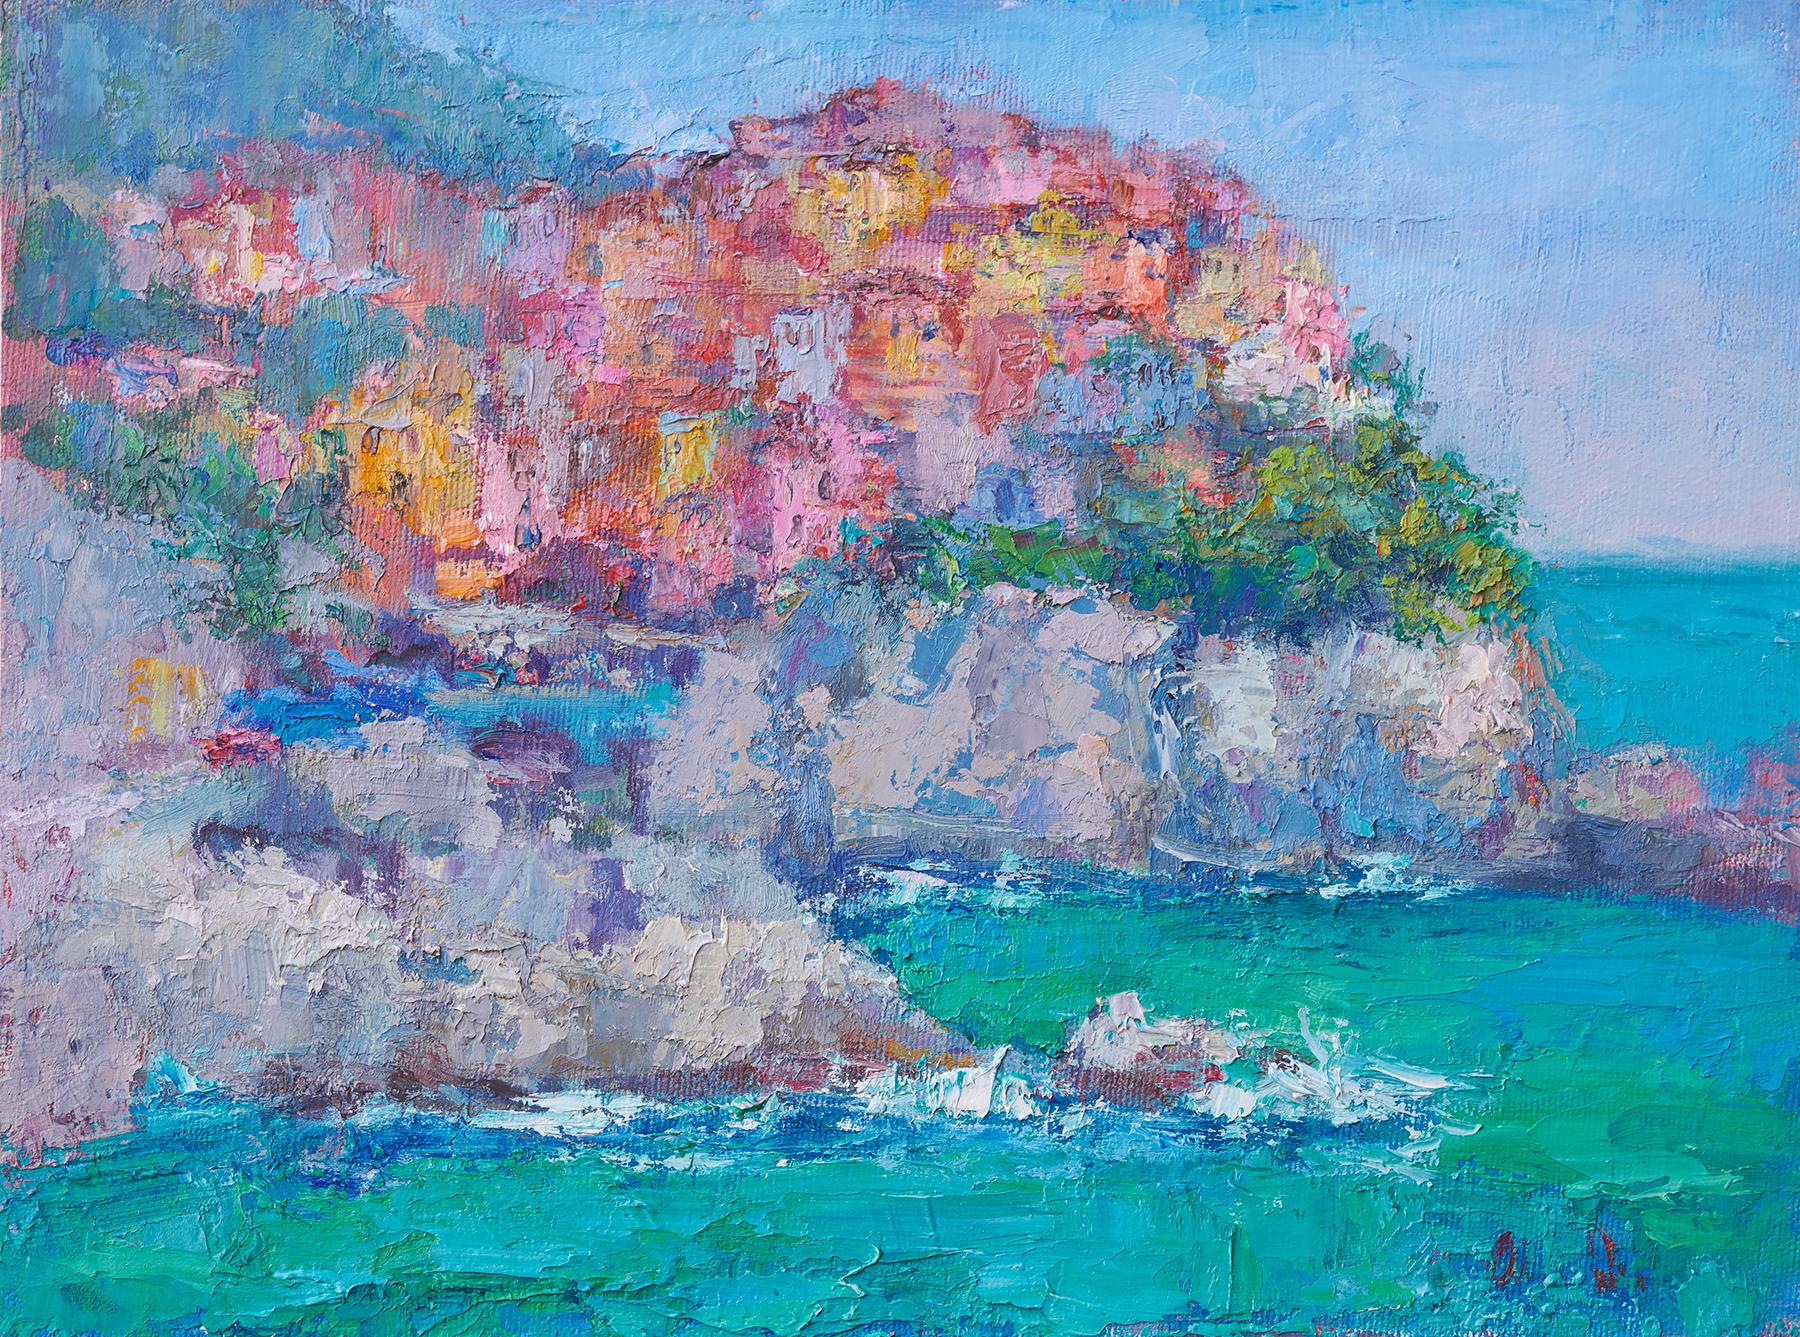 The Village by the Sea, Oil Painting